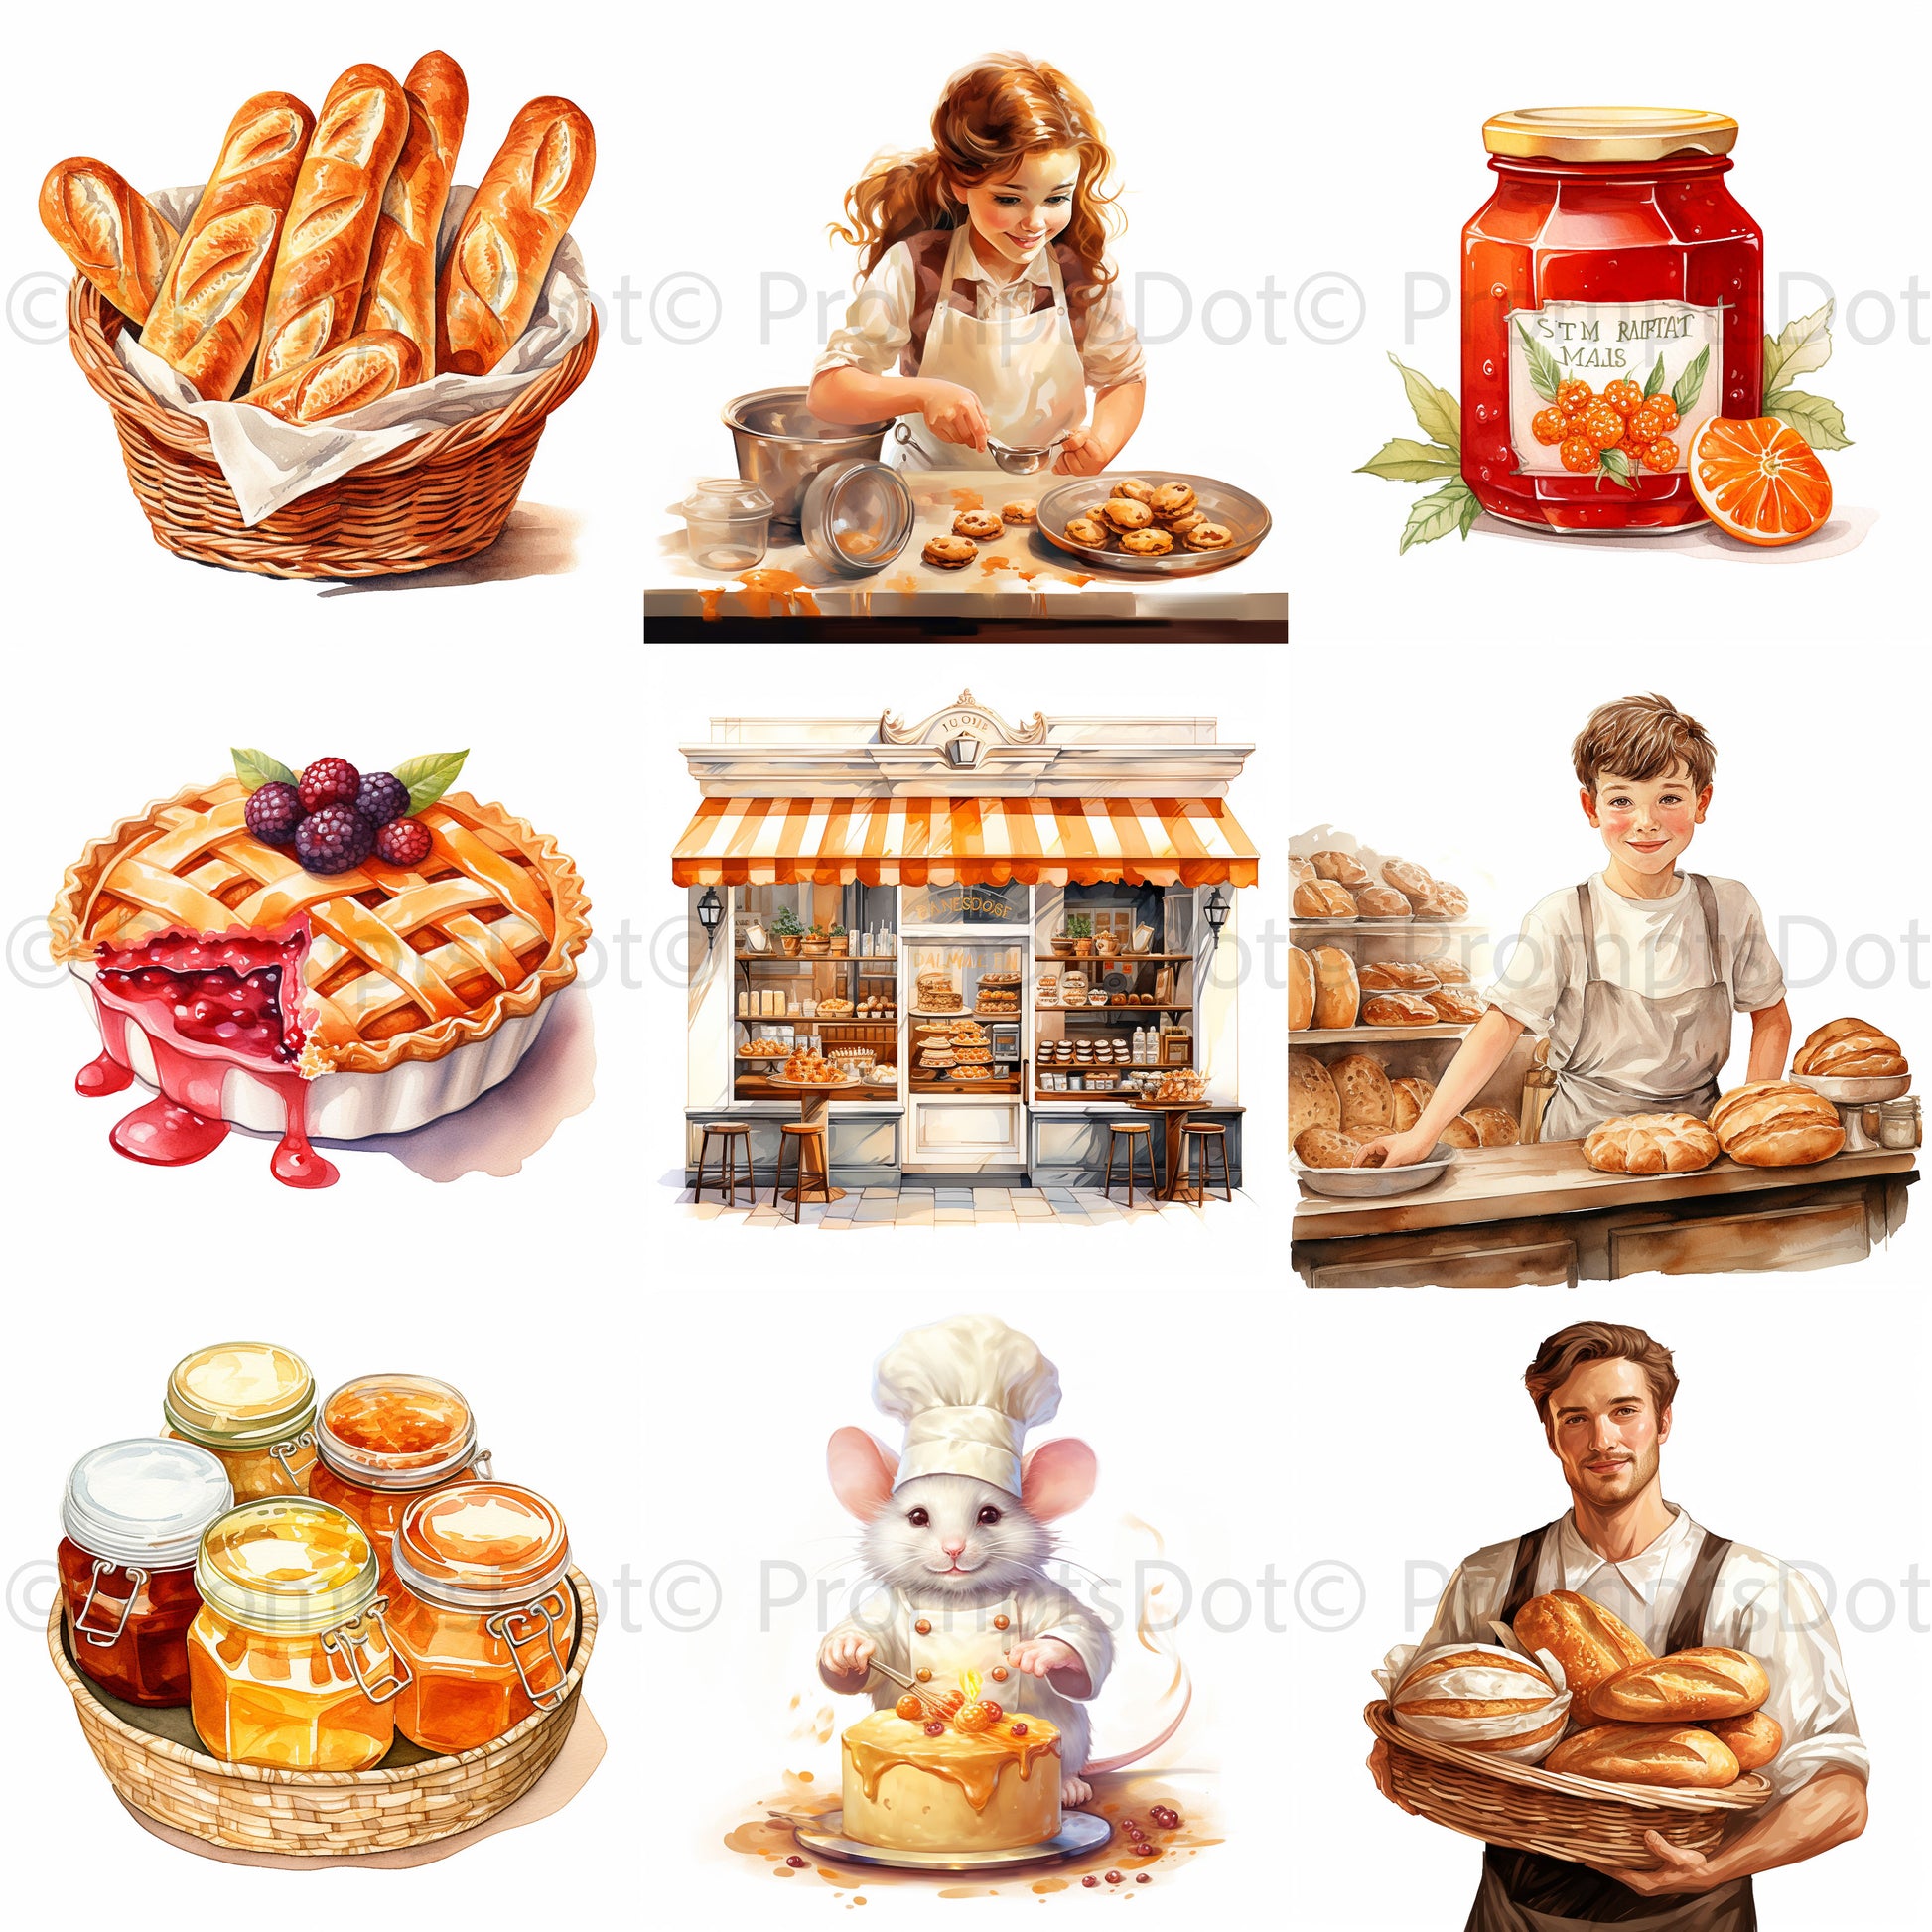 Watercolor Food Illustrations Bakery Art Midjourney Prompt Commercial Use